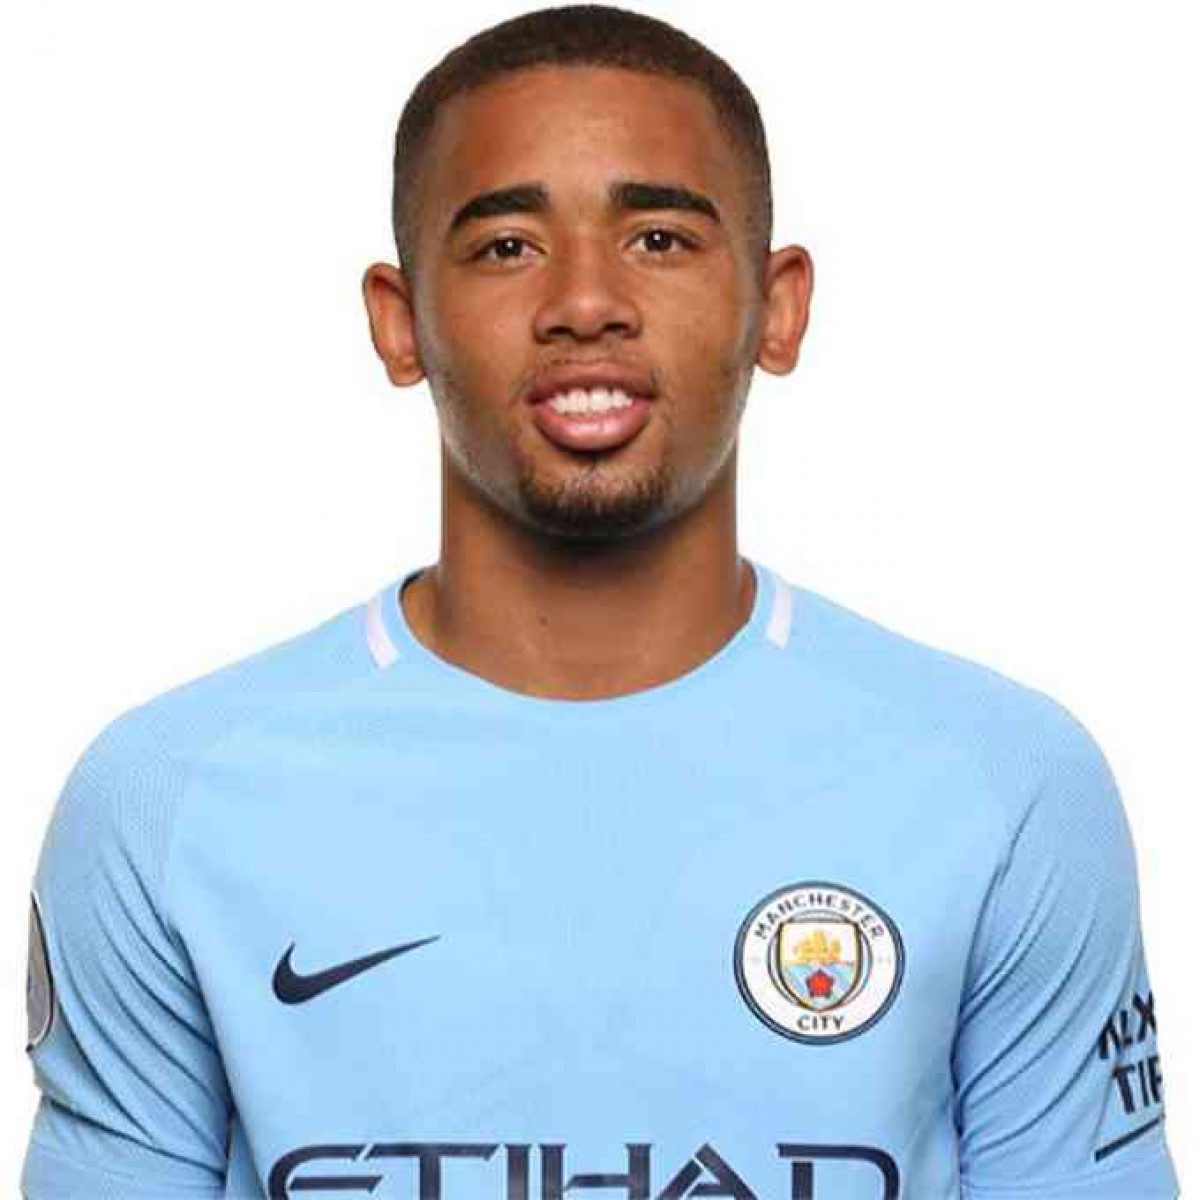 Gabriel Jesus Height Net Worth Age Affairs Bio And More 22 The Personage